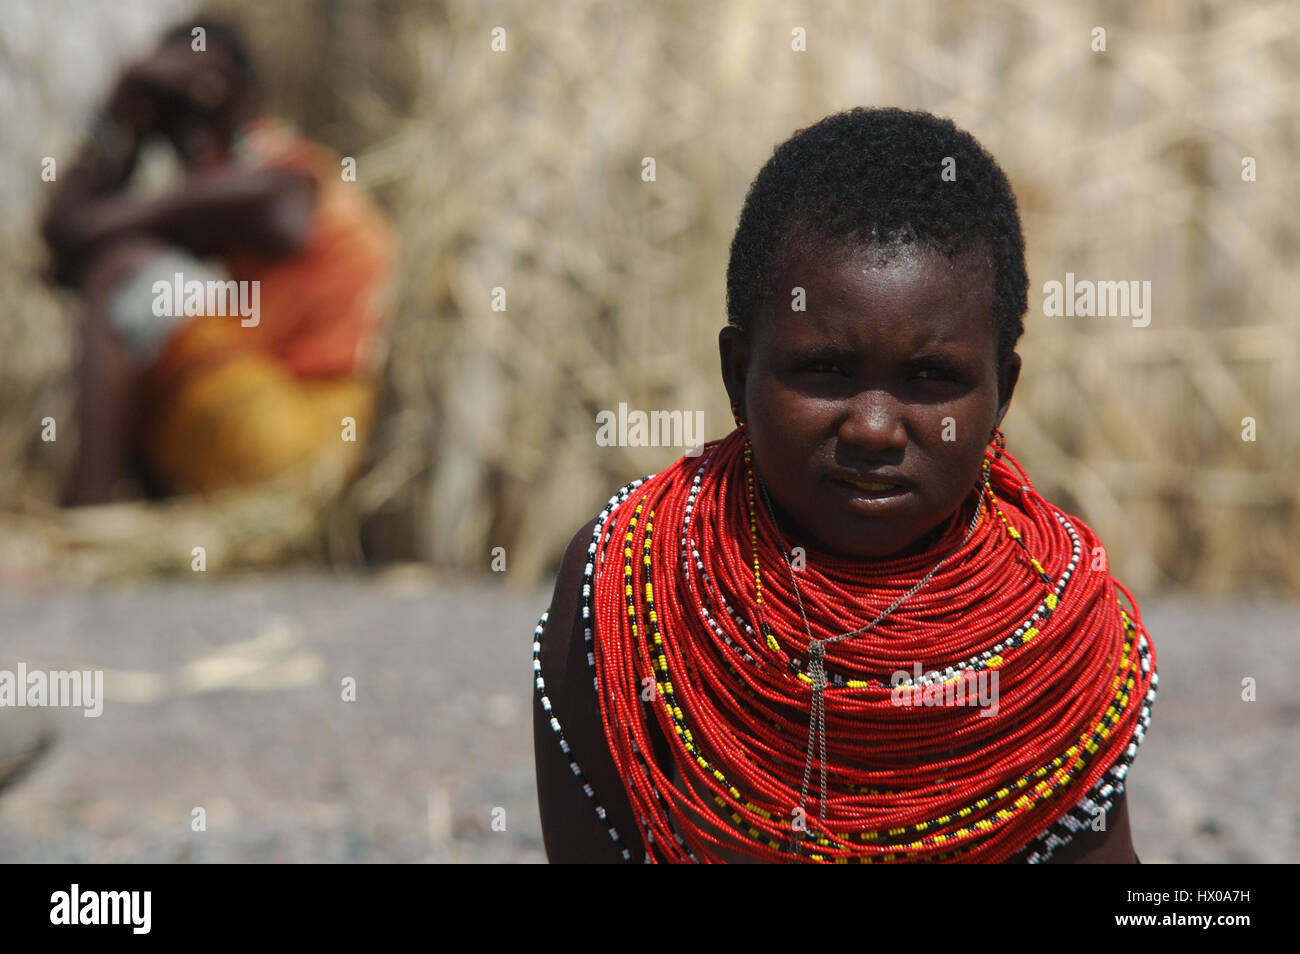 El Molo woman, this is the smallest african tribe with around 150 individuals living in primitive huts at the shores of the migthy Lake Turkana, Kenya Stock Photo